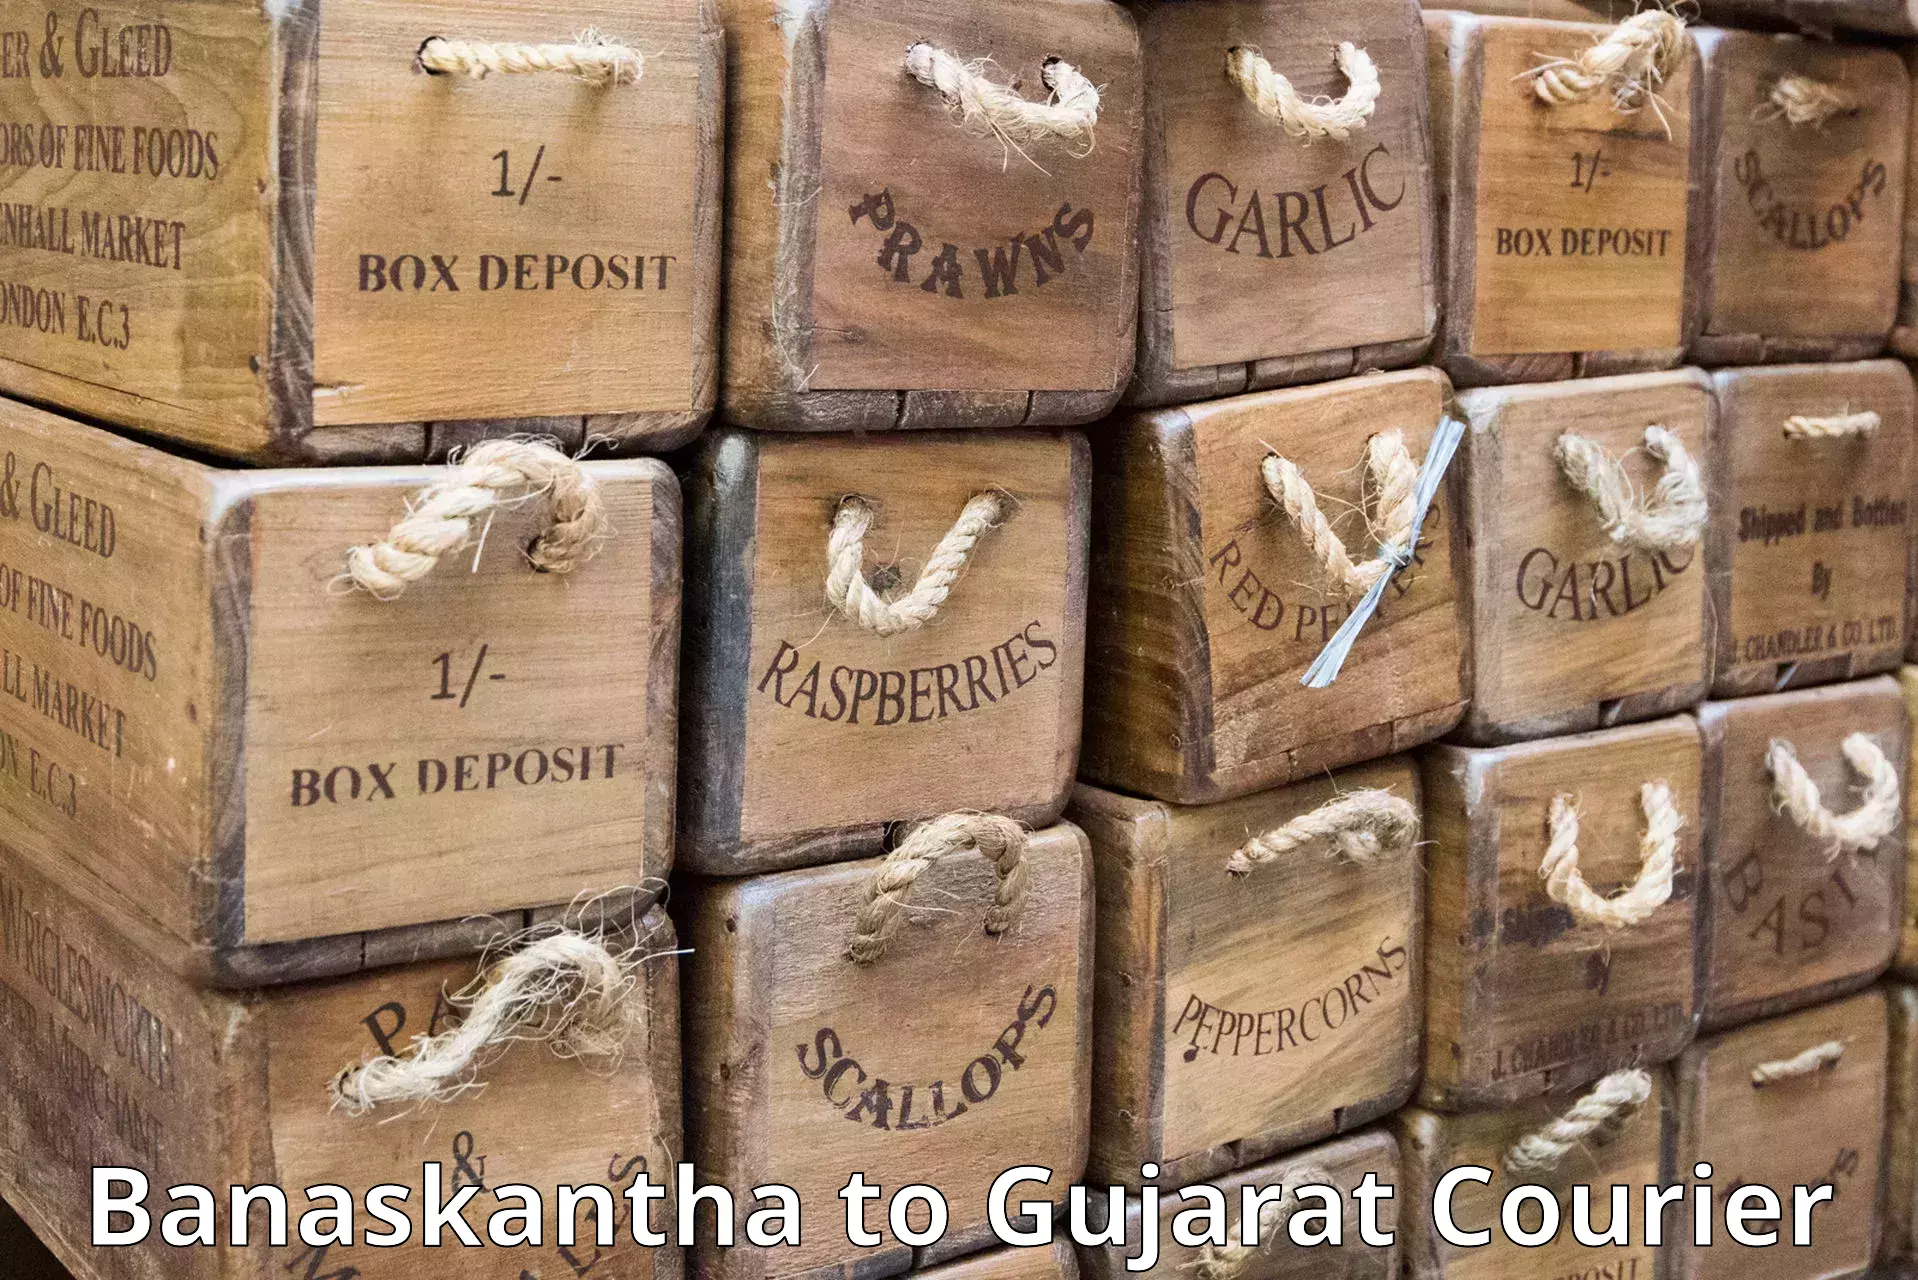 State-of-the-art courier technology Banaskantha to Palanpur